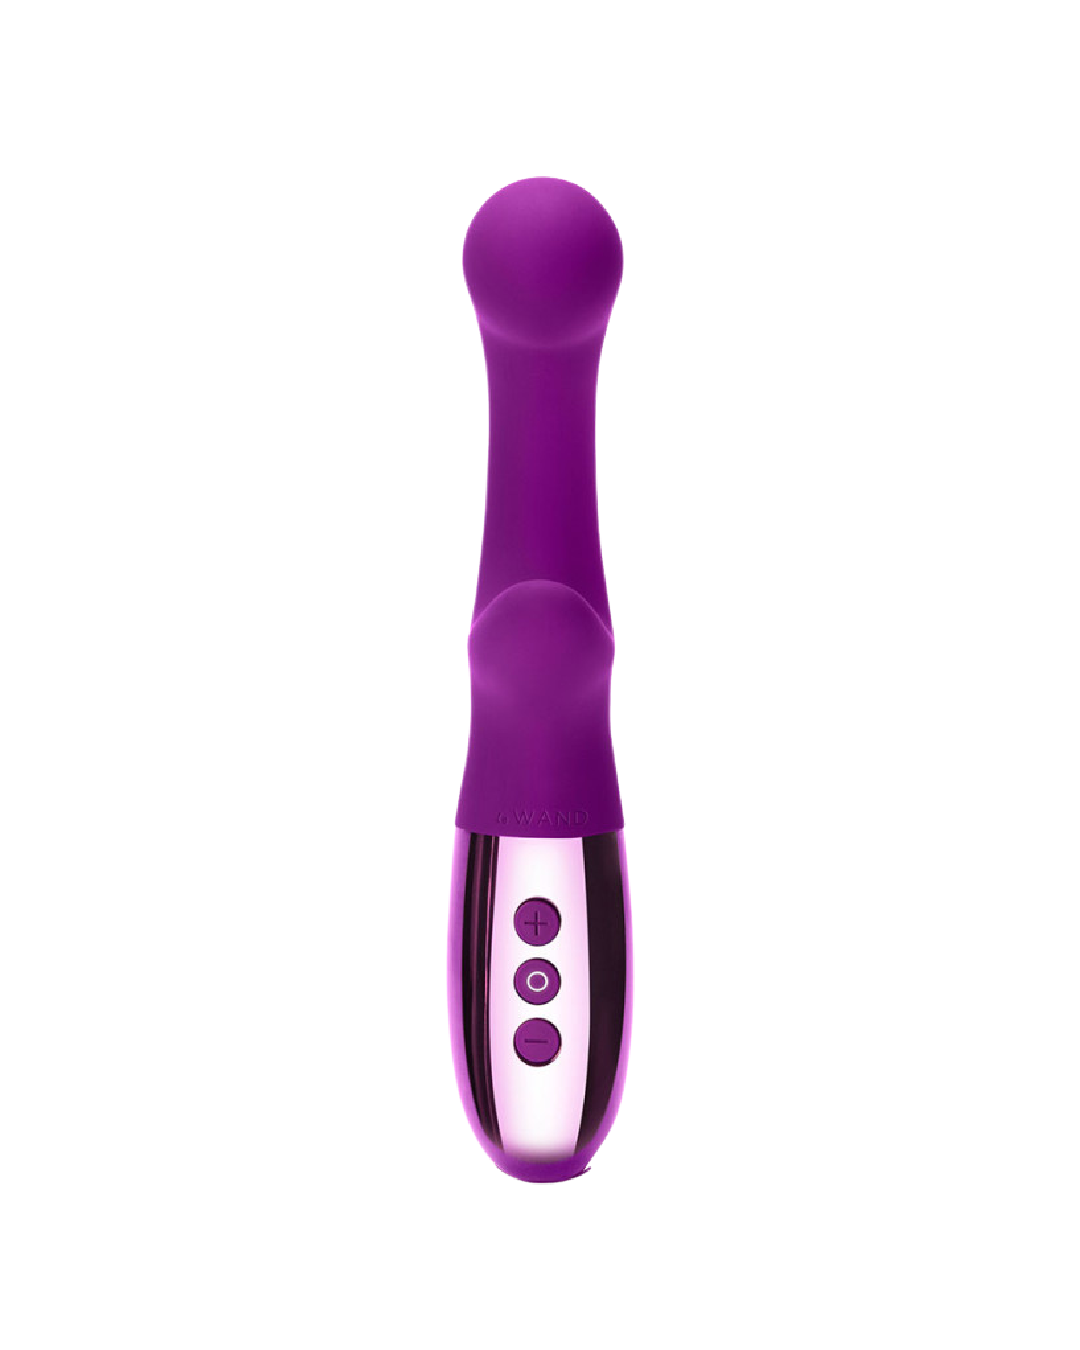 Le Wand XO Double Motor Internal and External Vibrator - Dark Cherry front view of buttons